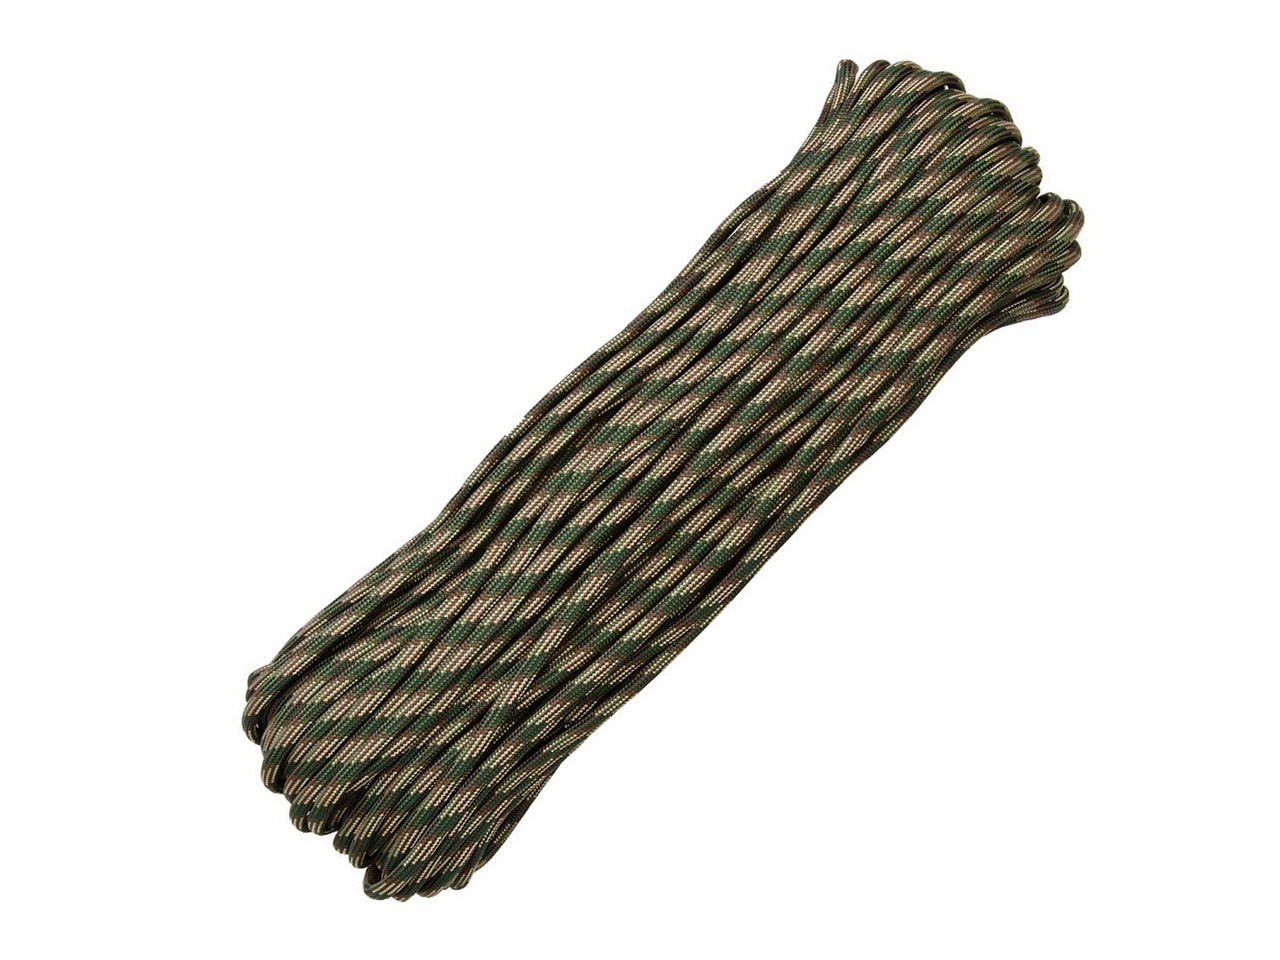 Atwood Rope MFG Paracord 550 Recon